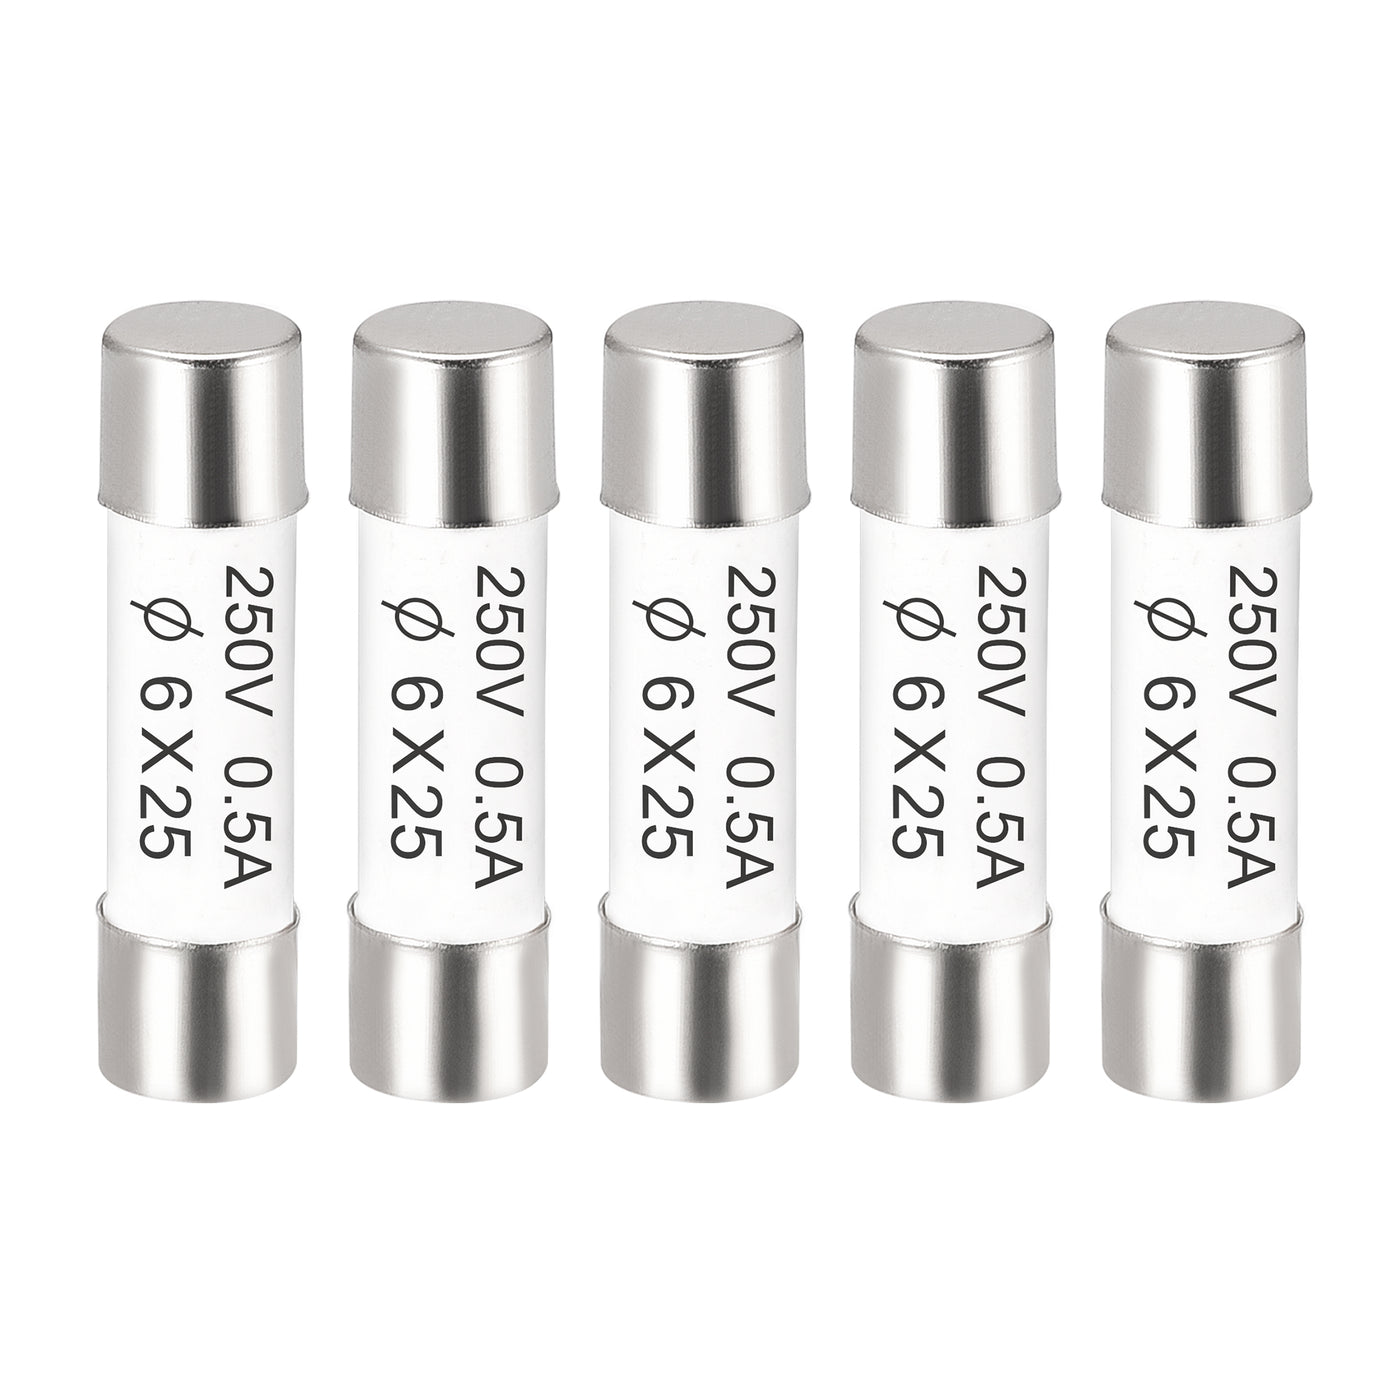 uxcell Uxcell Ceramic Cartridge Fuses 0.5A 250V 6x25mm Fast Blow for Energy Saving Lamp 5pcs